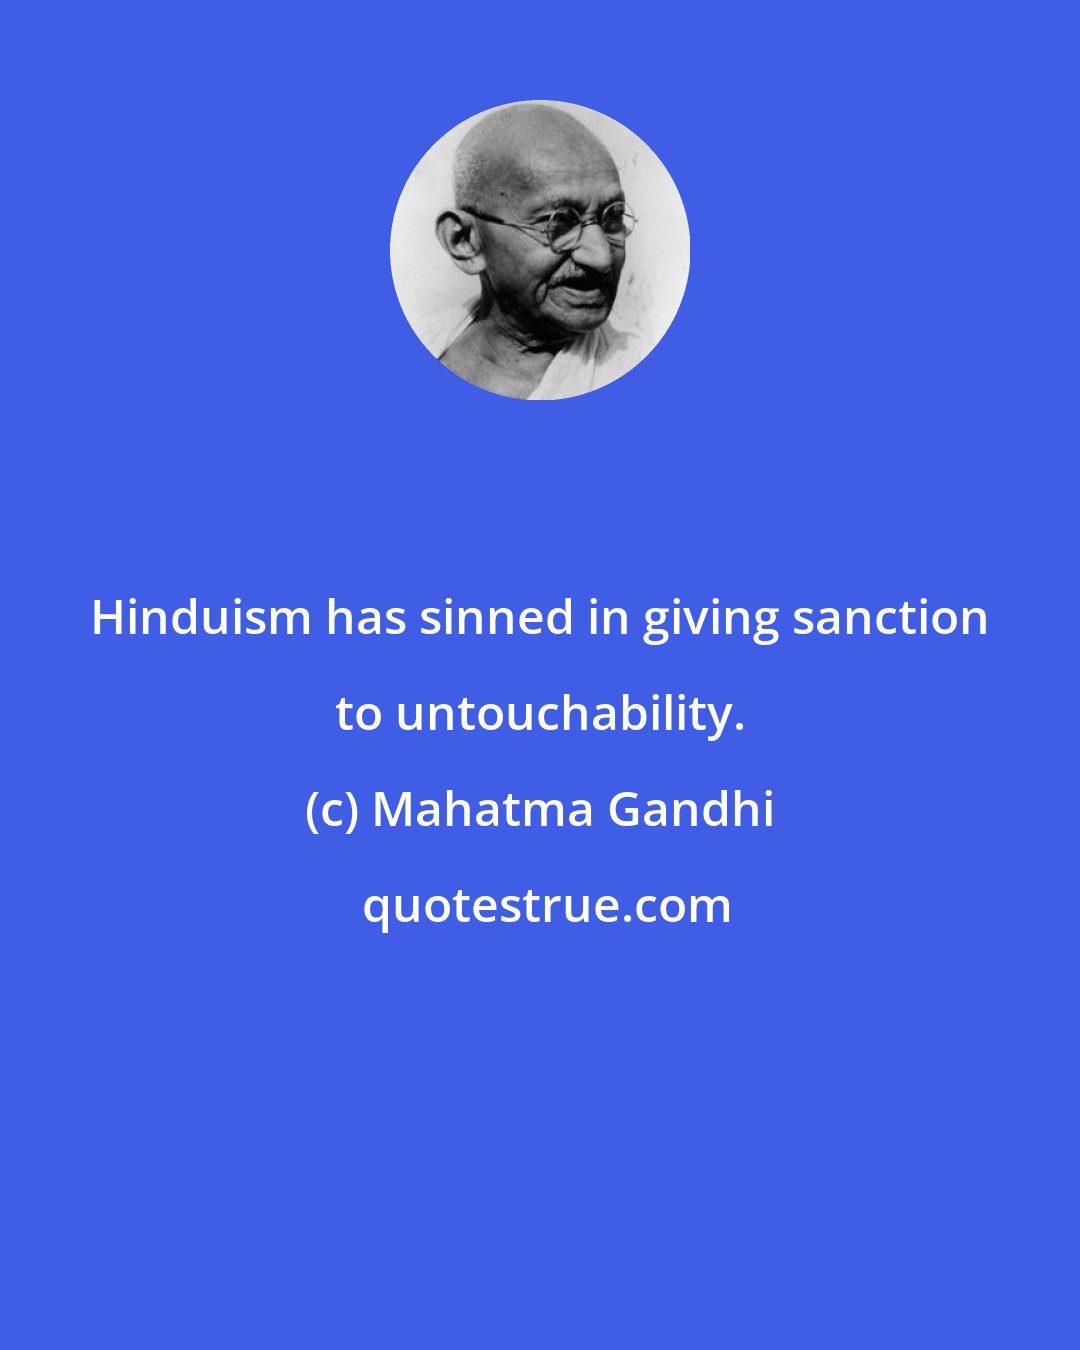 Mahatma Gandhi: Hinduism has sinned in giving sanction to untouchability.